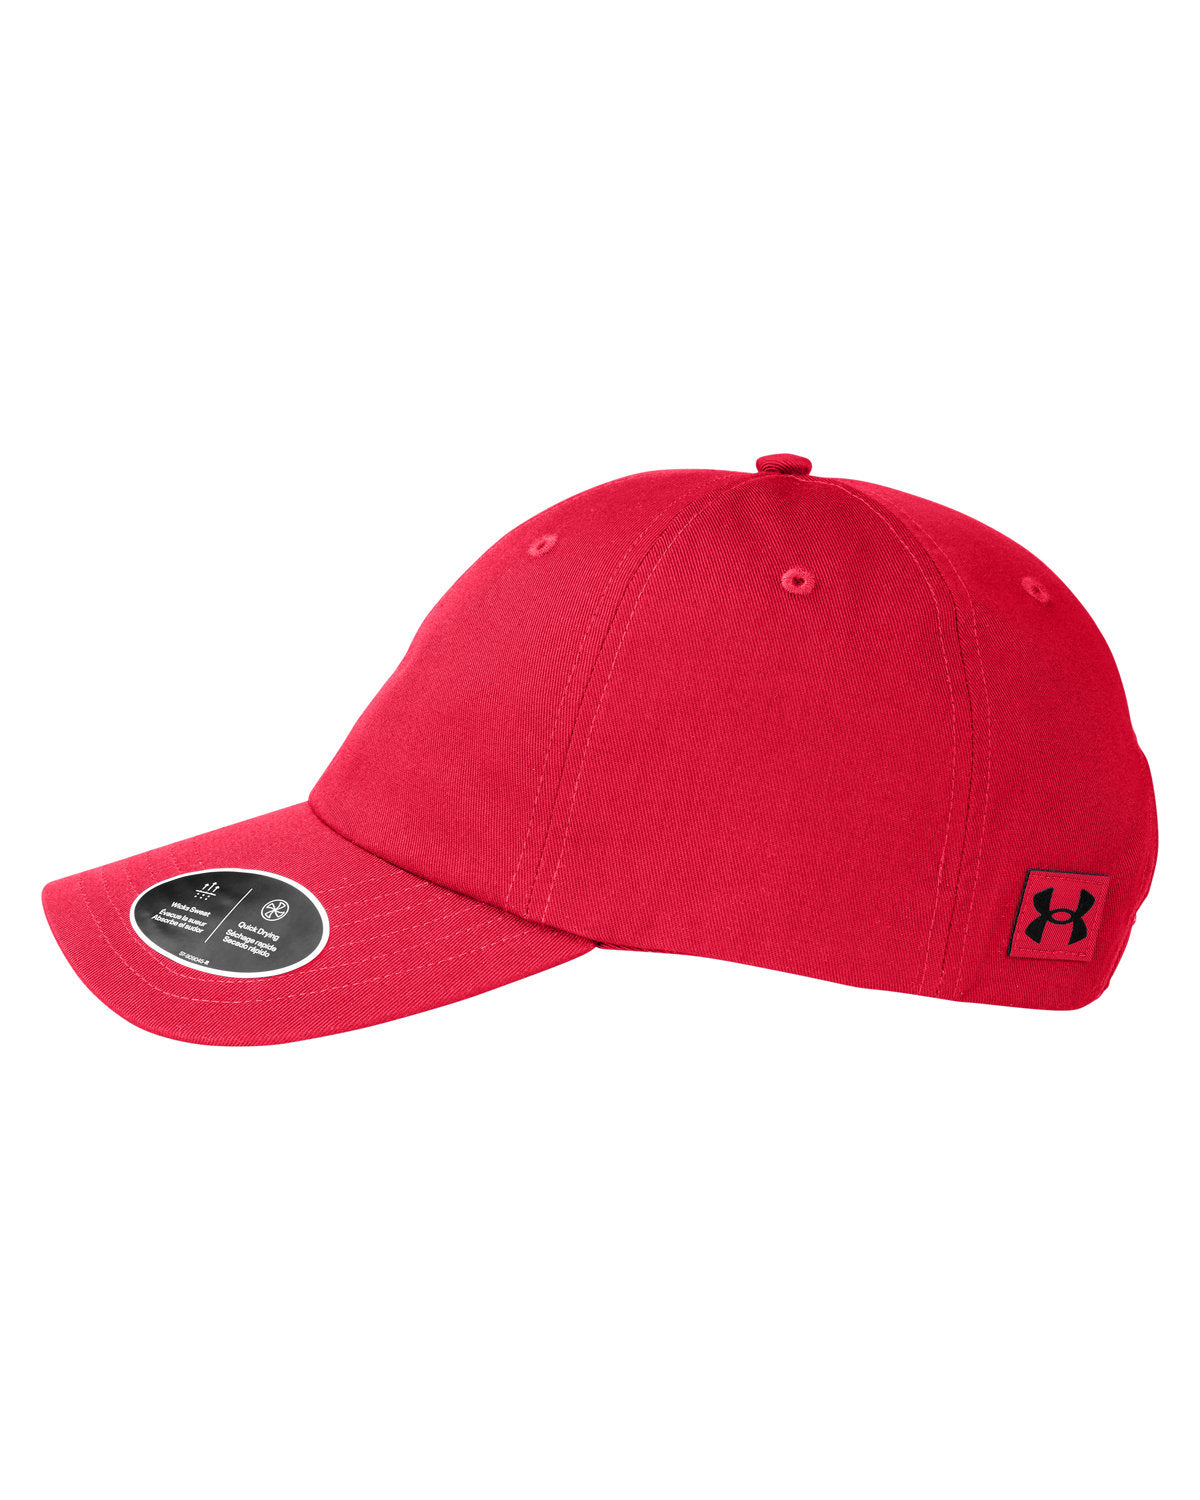 Under Armour Chino Customized Hats, Red